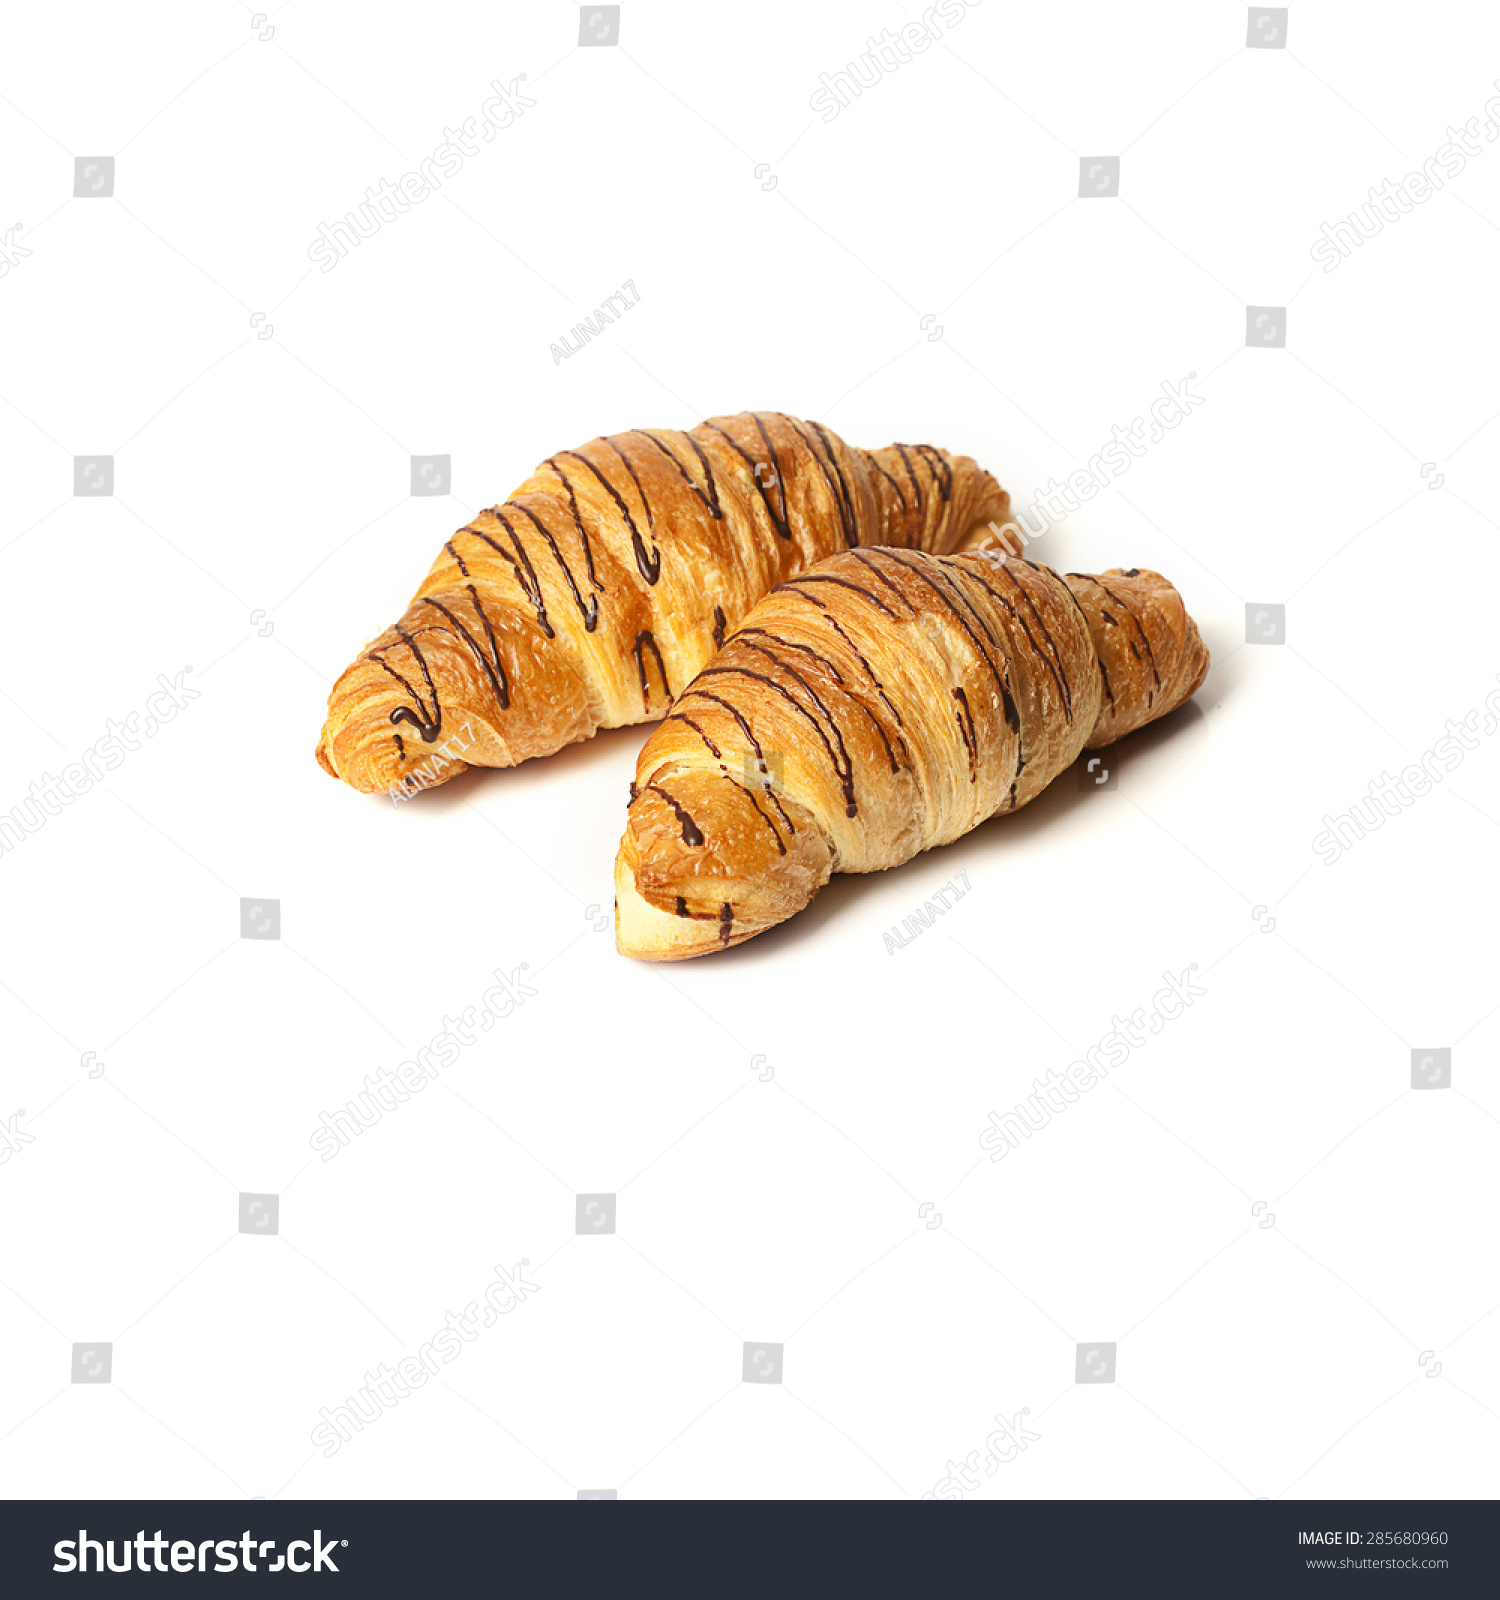 Homemade french croissants  #285680960